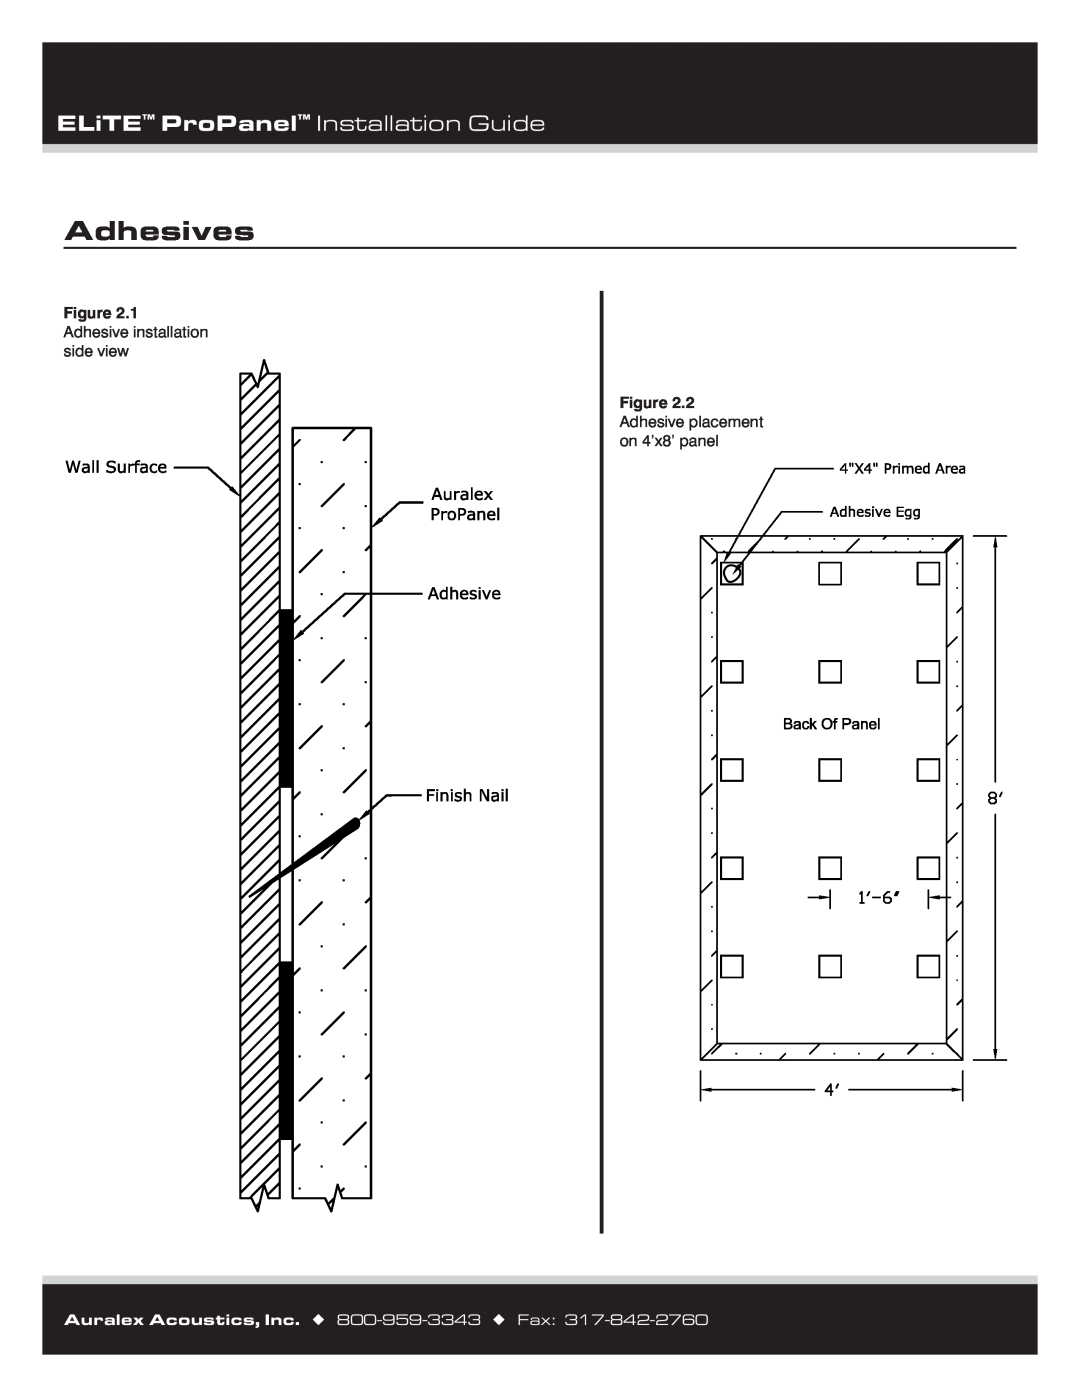 Auralex Acoustics Panels manual Adhesives, ELiTE ProPanel Installation Guide, 1 Adhesive installation side view 